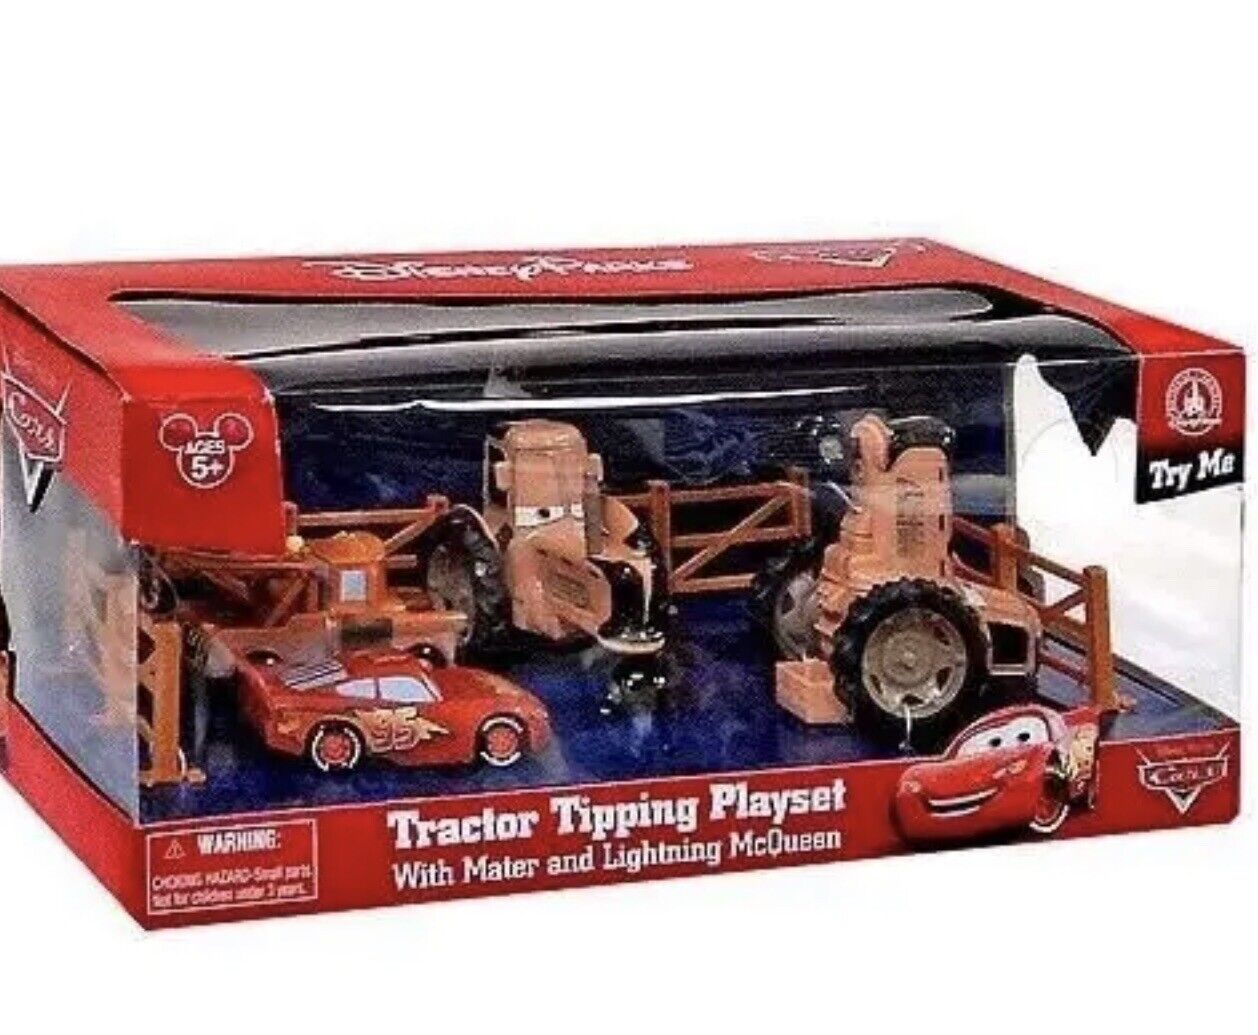 Disney Pixar Cars Tractor Tipping Playset with Mater and Lightning McQueen NEW